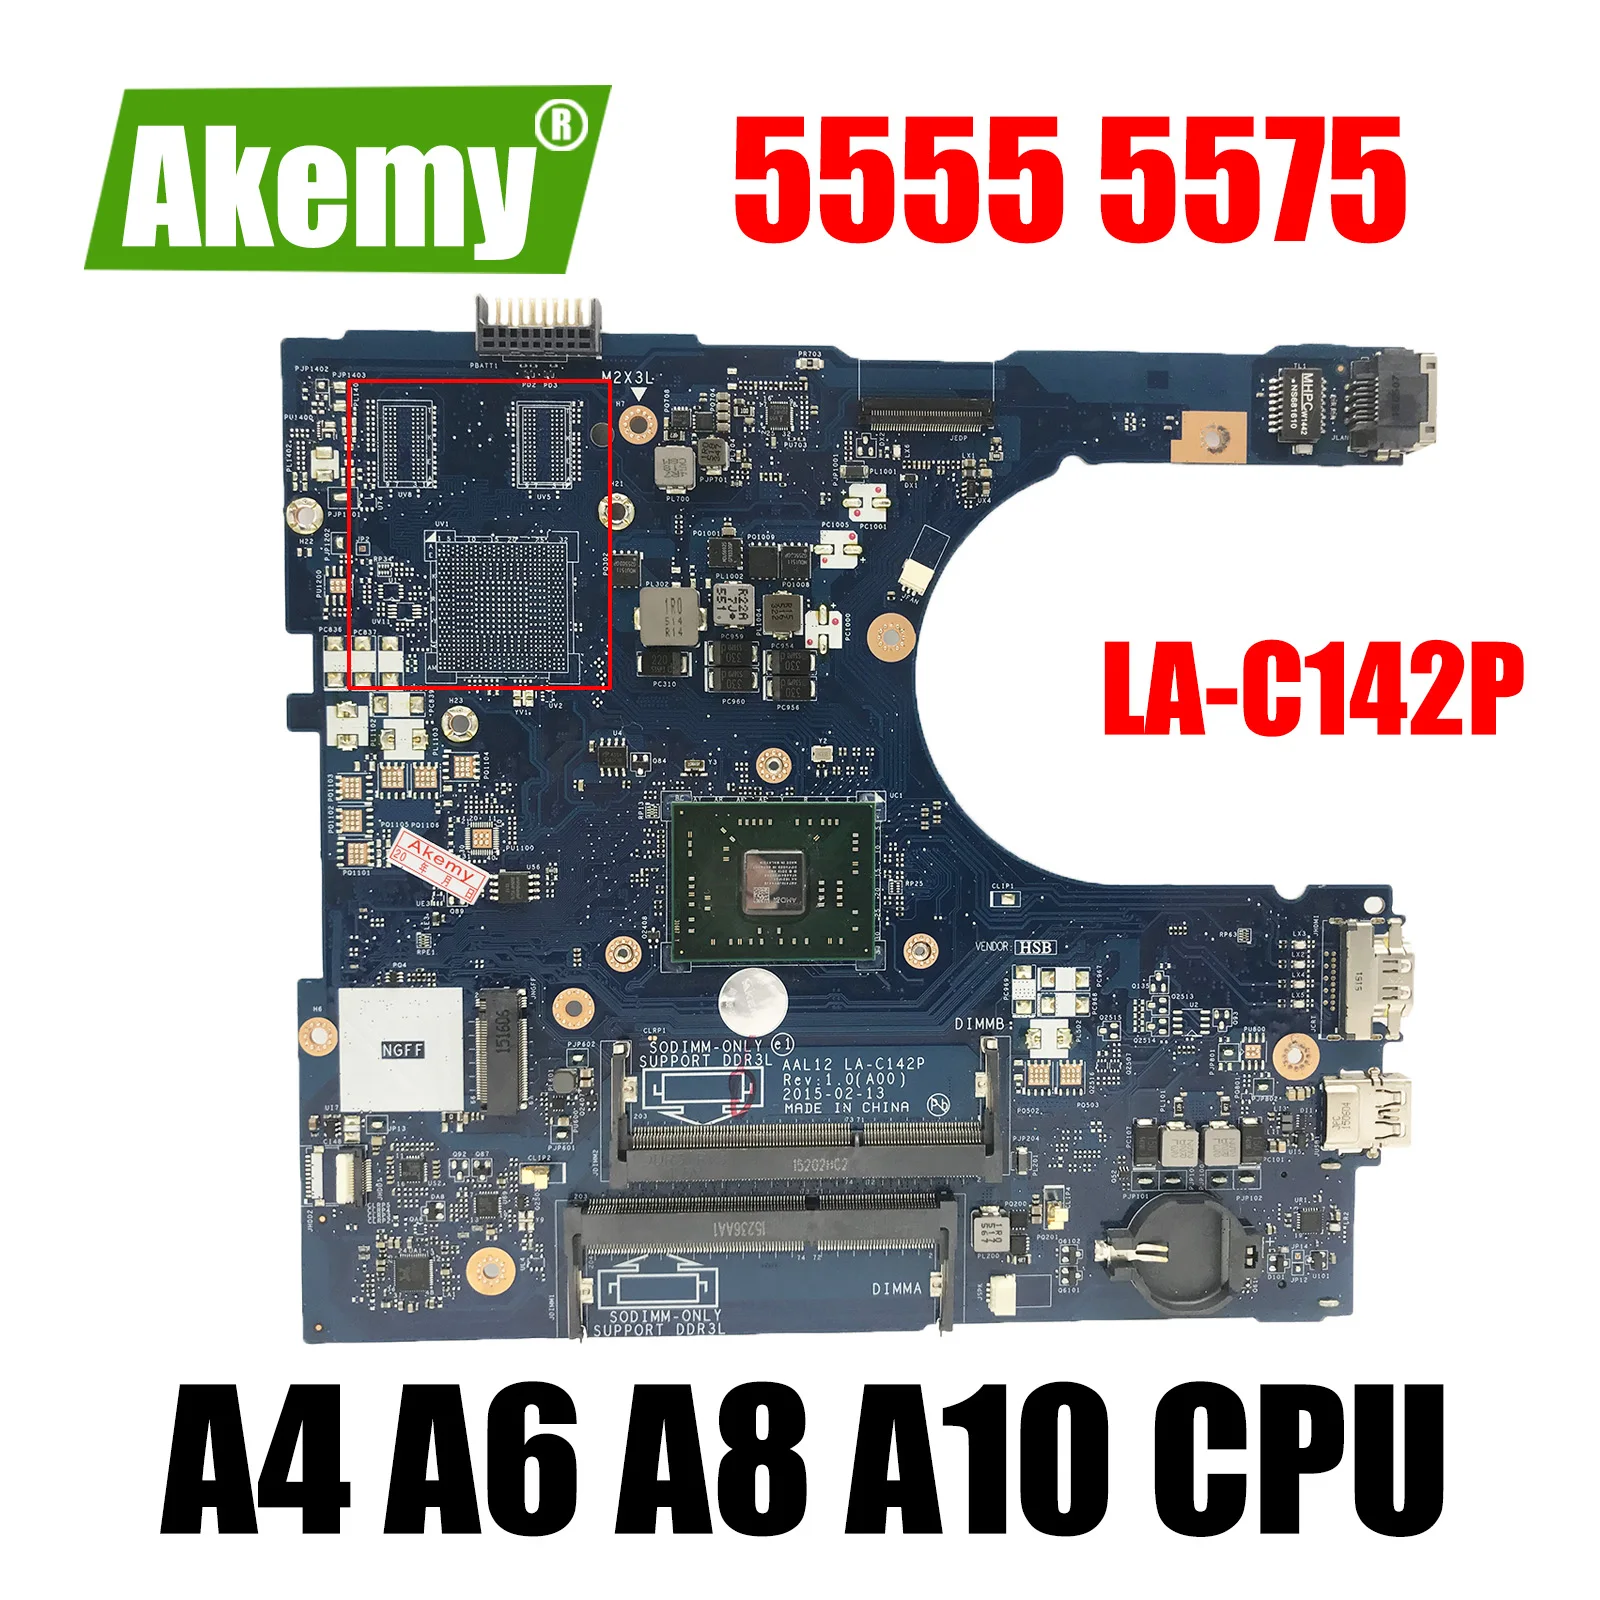 

FOR dell INSPIRON 5555 5455 5755 Laptop Motherboard AAL12 LA-C142P CN-09J3FV 0799KM Mainboard w/ A4 A6 A8 A10 cpu DIS or UMA